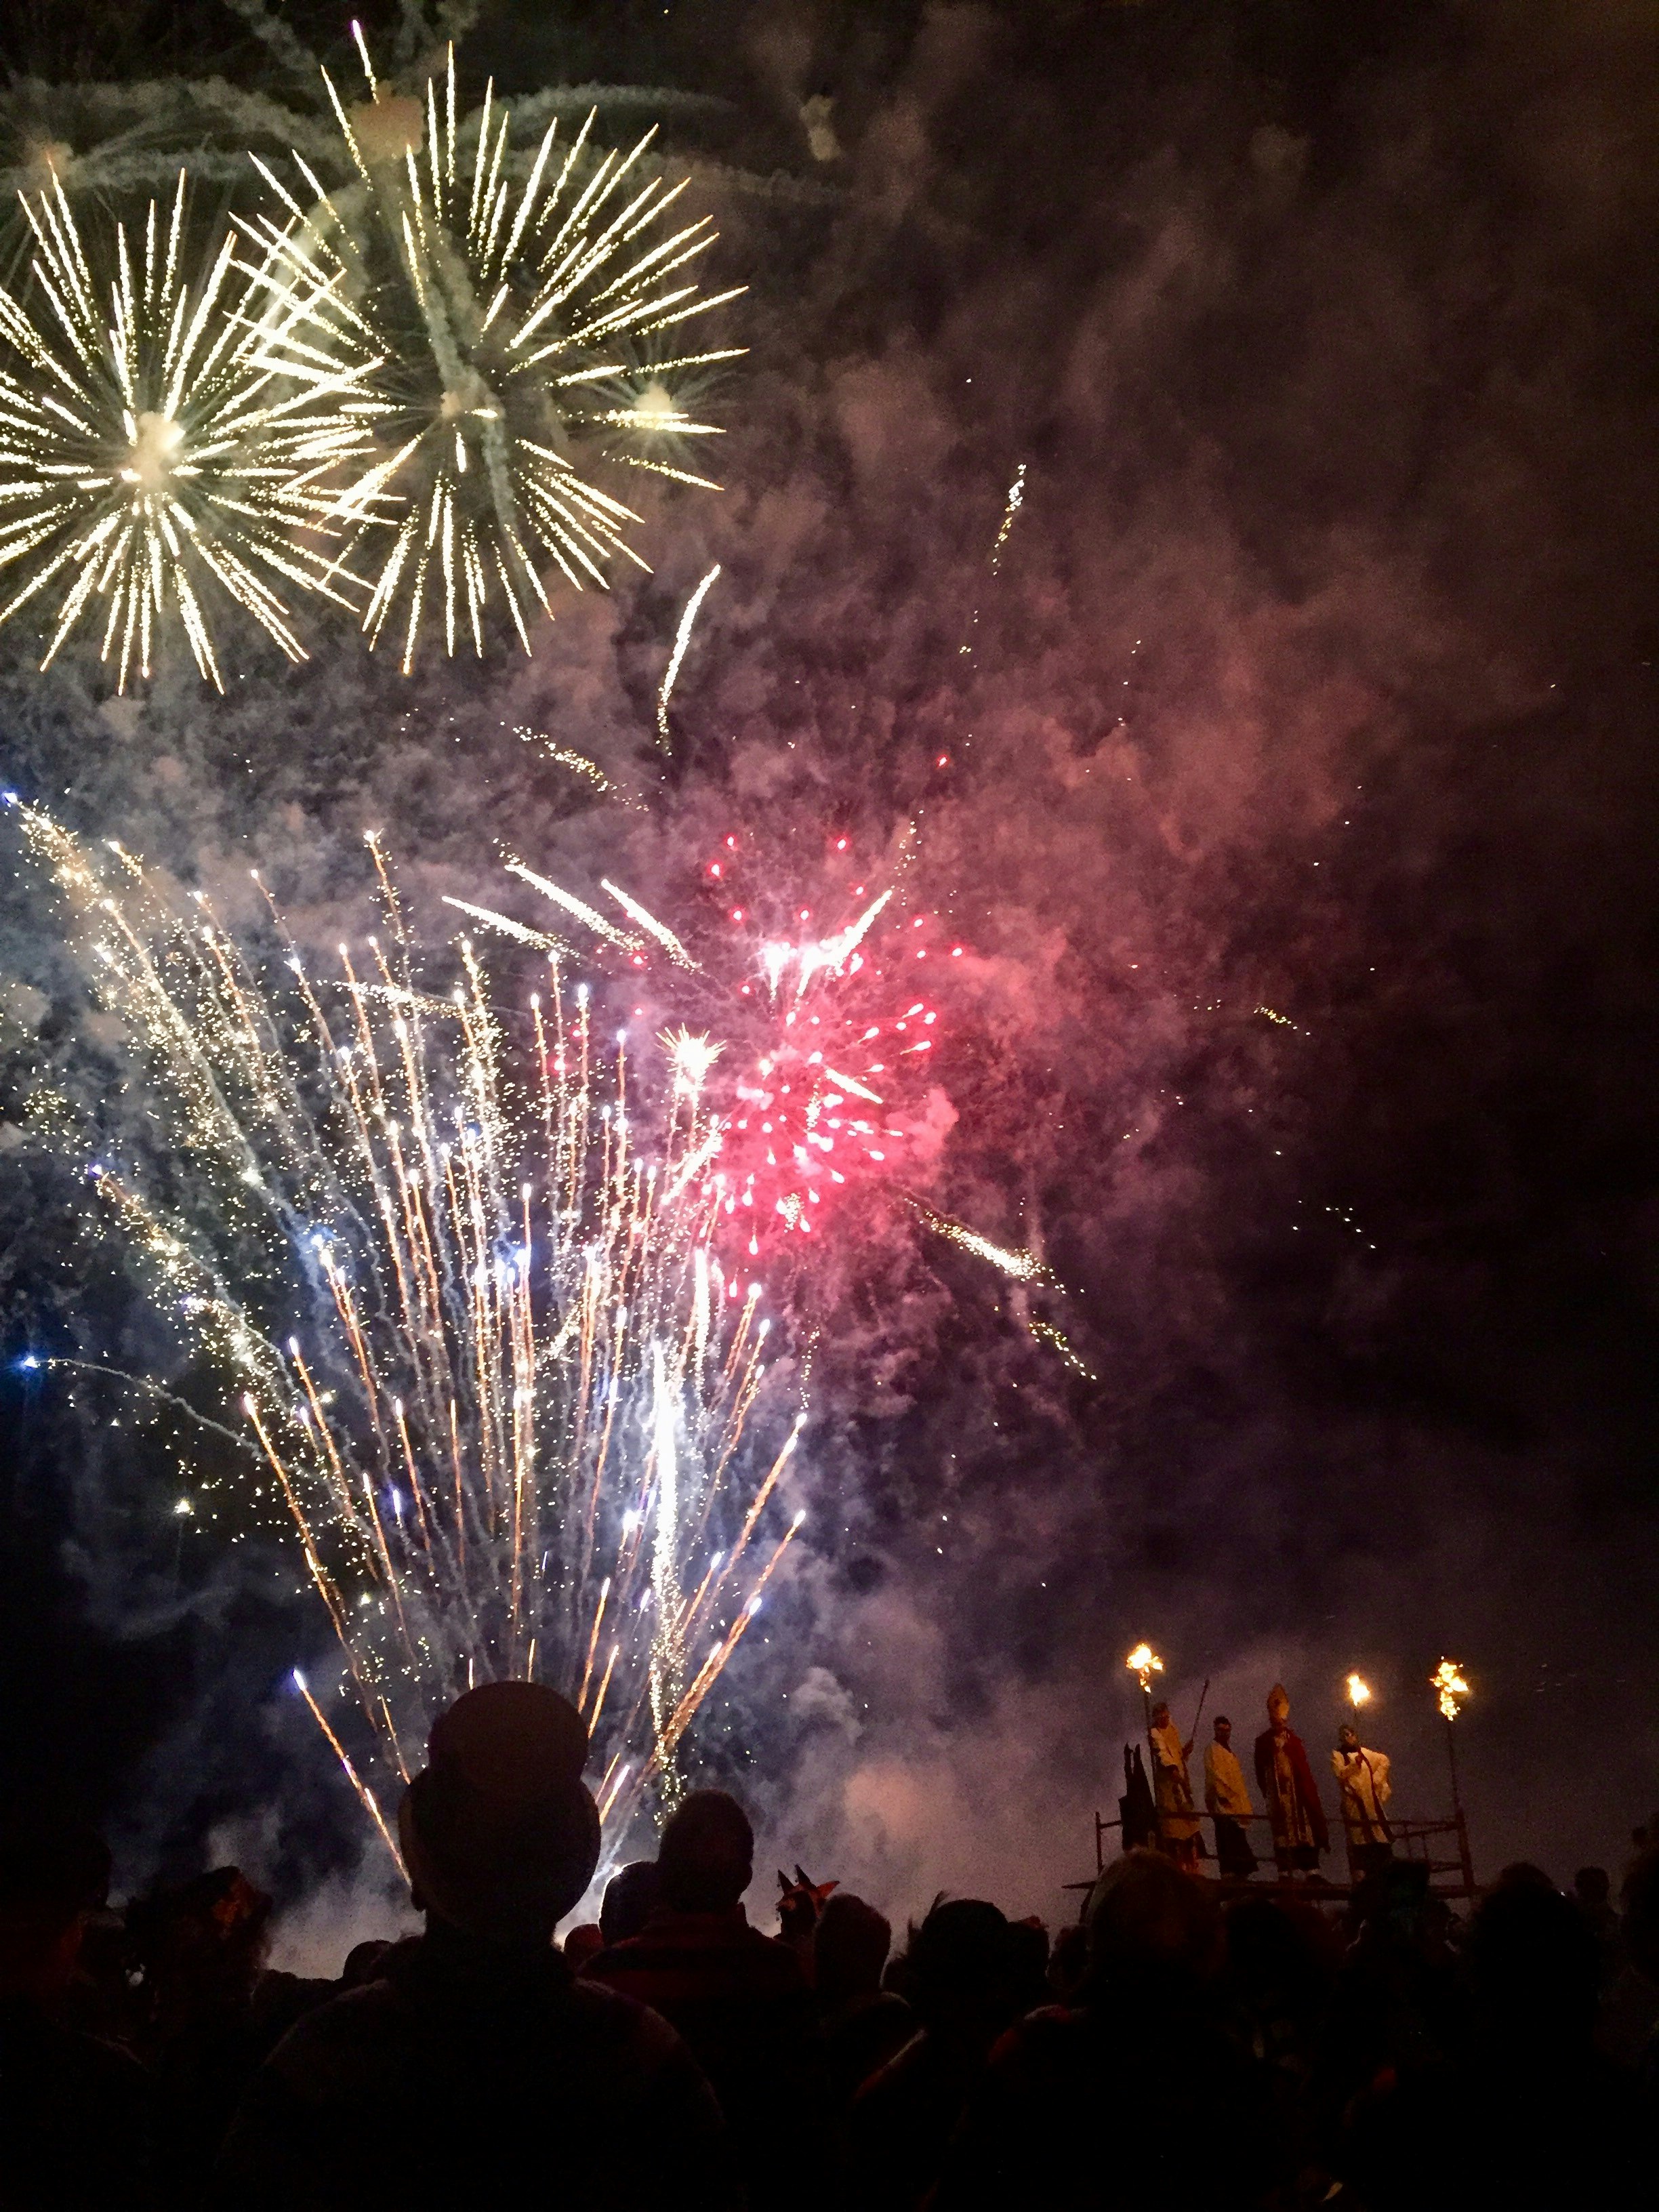 A nighttime scene of fireworks lighting a dark sky. The heads of people standing in the crowd are silhouetted against the bright fireworks.